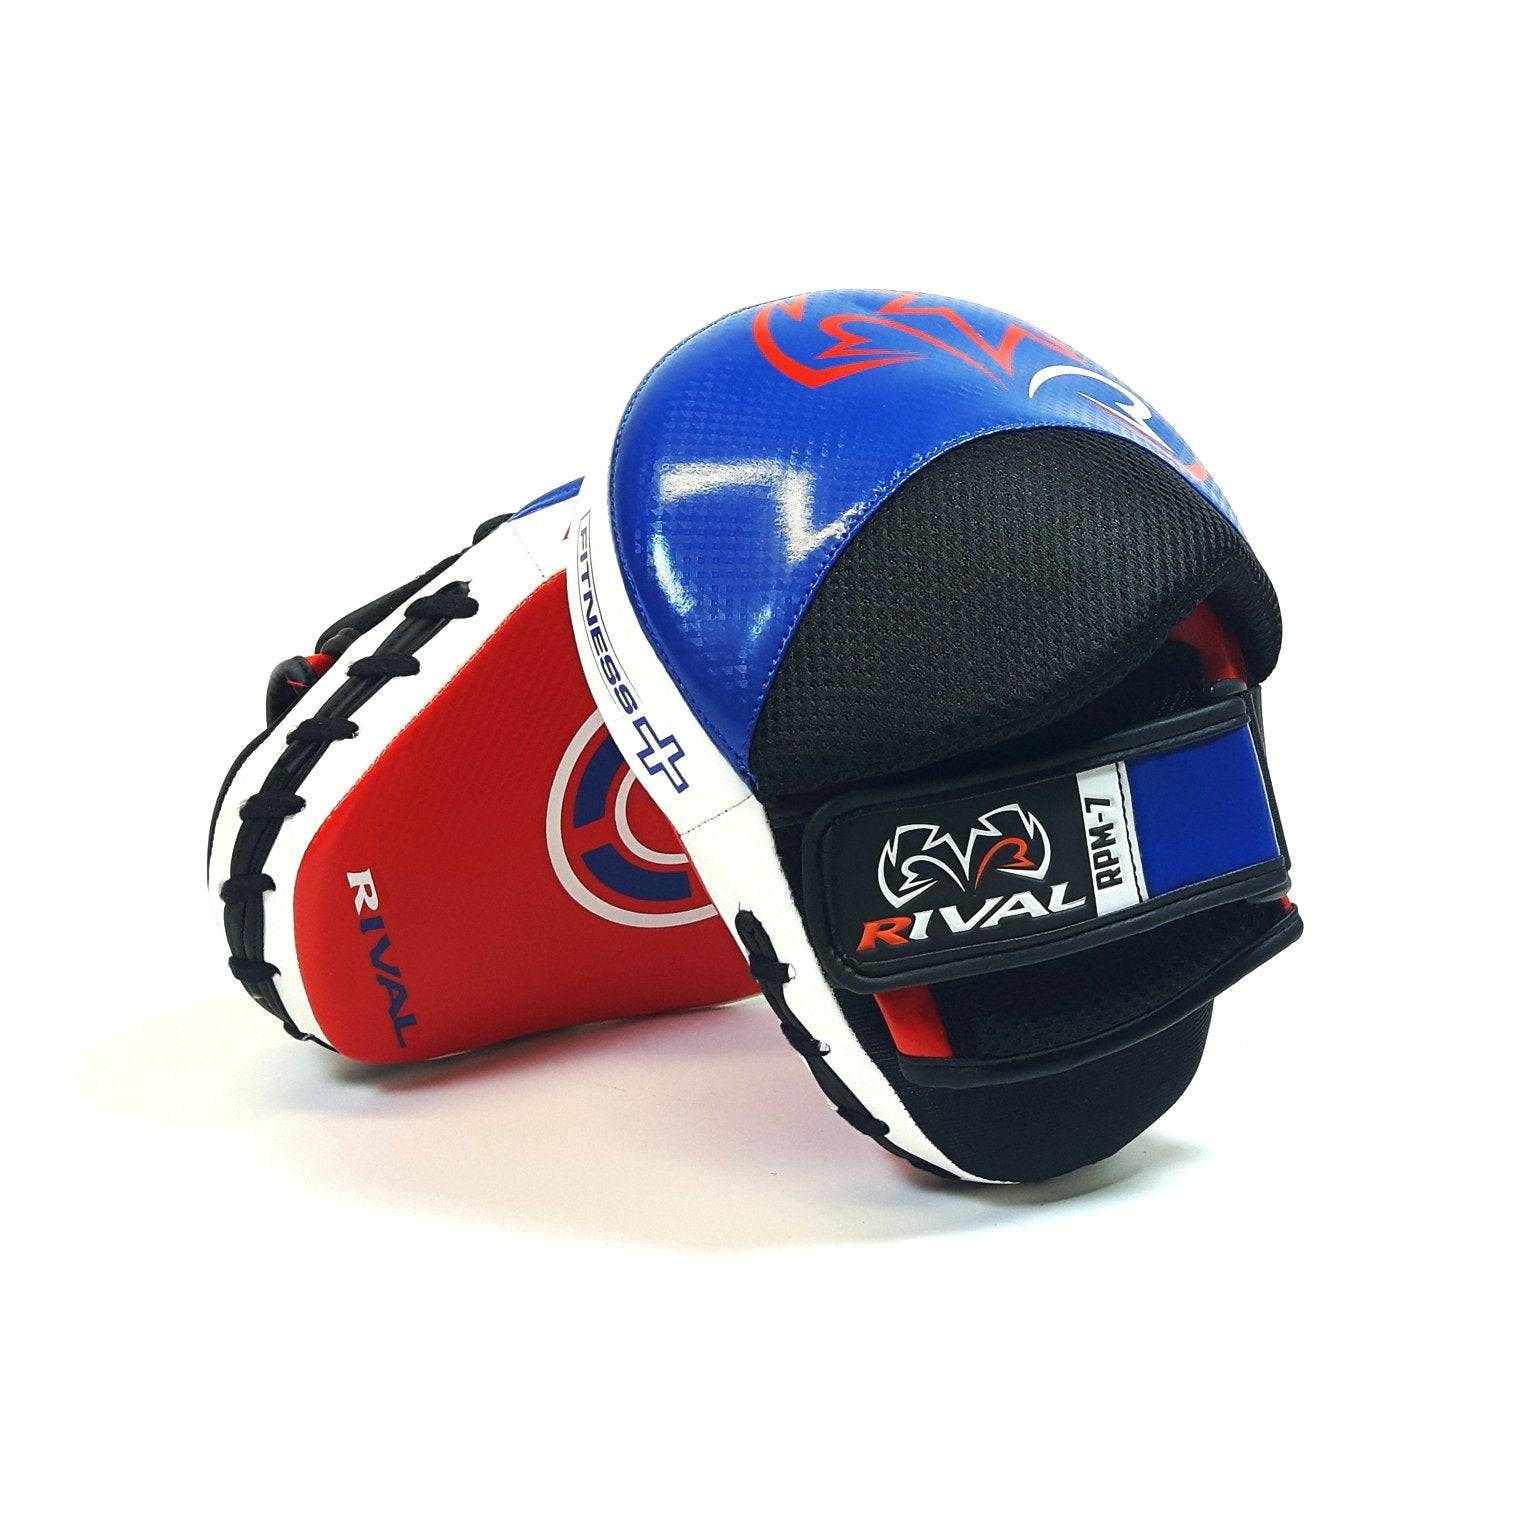 Rival | Punch Mitts - RPM7-Fitness Plus - XTC Fitness - Exercise Equipment Superstore - Canada - Punch Mitts